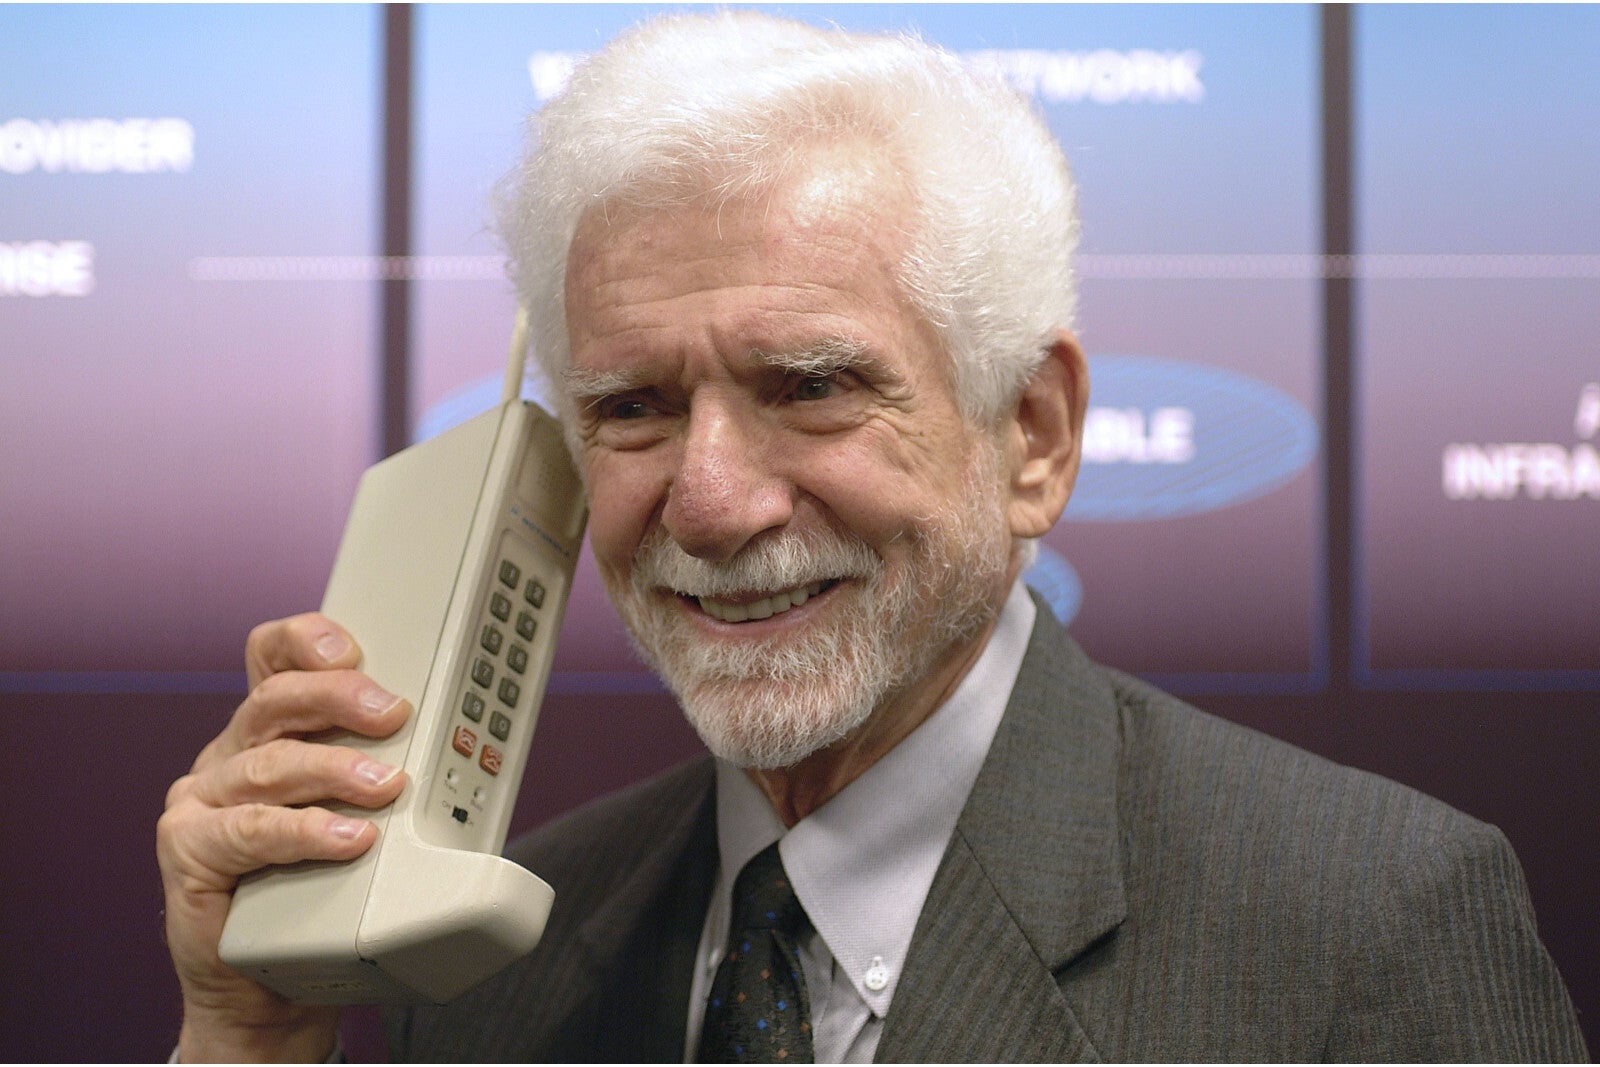 Marty Cooper made the very first cell phone call - after he invented them